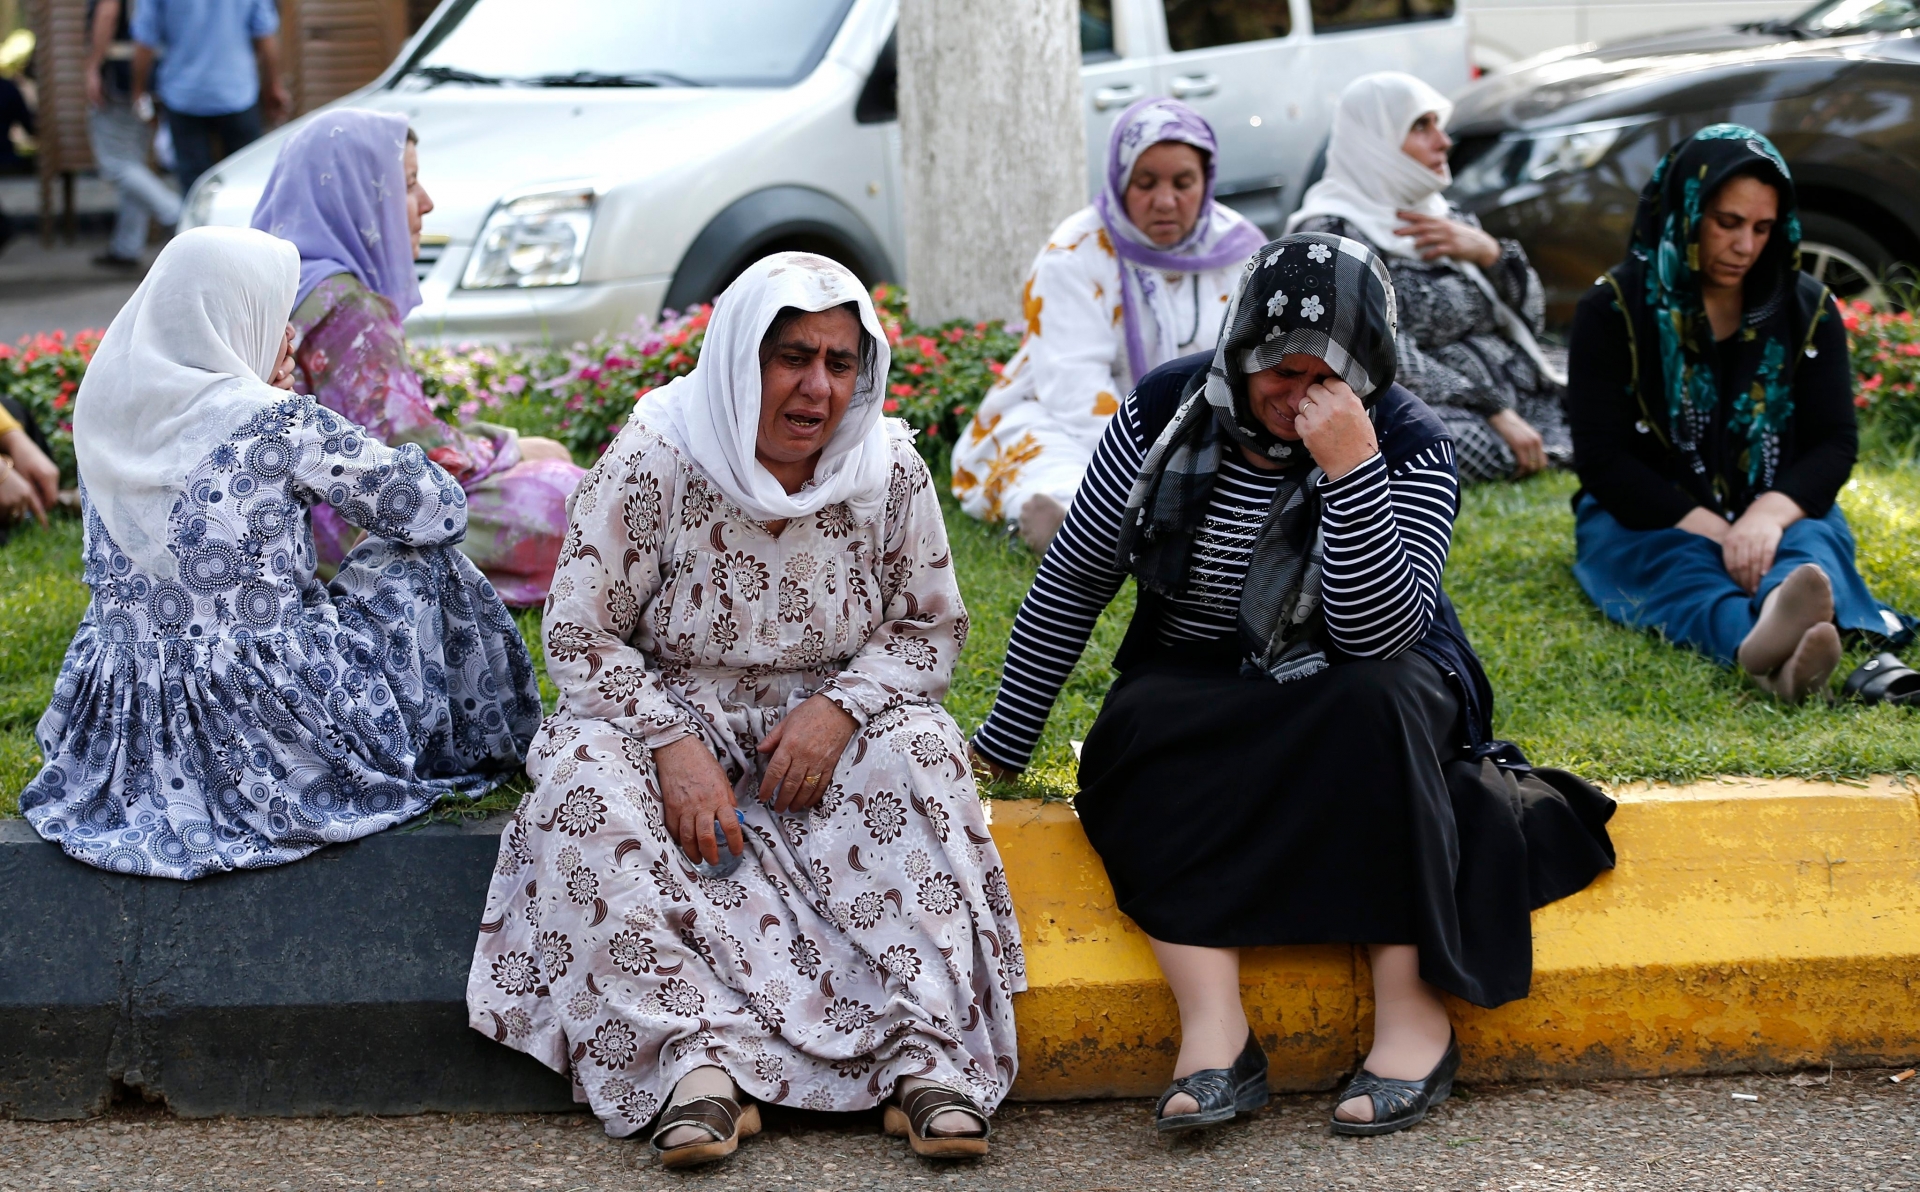 epa05504397 Relatives of victims killed in a bomb attack on a pre wedding party on 20 August evening mourn in front of the forensic medicine institute in Gaziantep, in the southeast of Turkey, 21 August 2016. At least 30 people were killed in a suicide attack late 20 August during a henna night (a ceremony at the day before wedding) at a street in the Sahinbey district of Gaziantep city, local media reported.  EPA/SEDAT SUNA TURKEY BOMB ATTACK